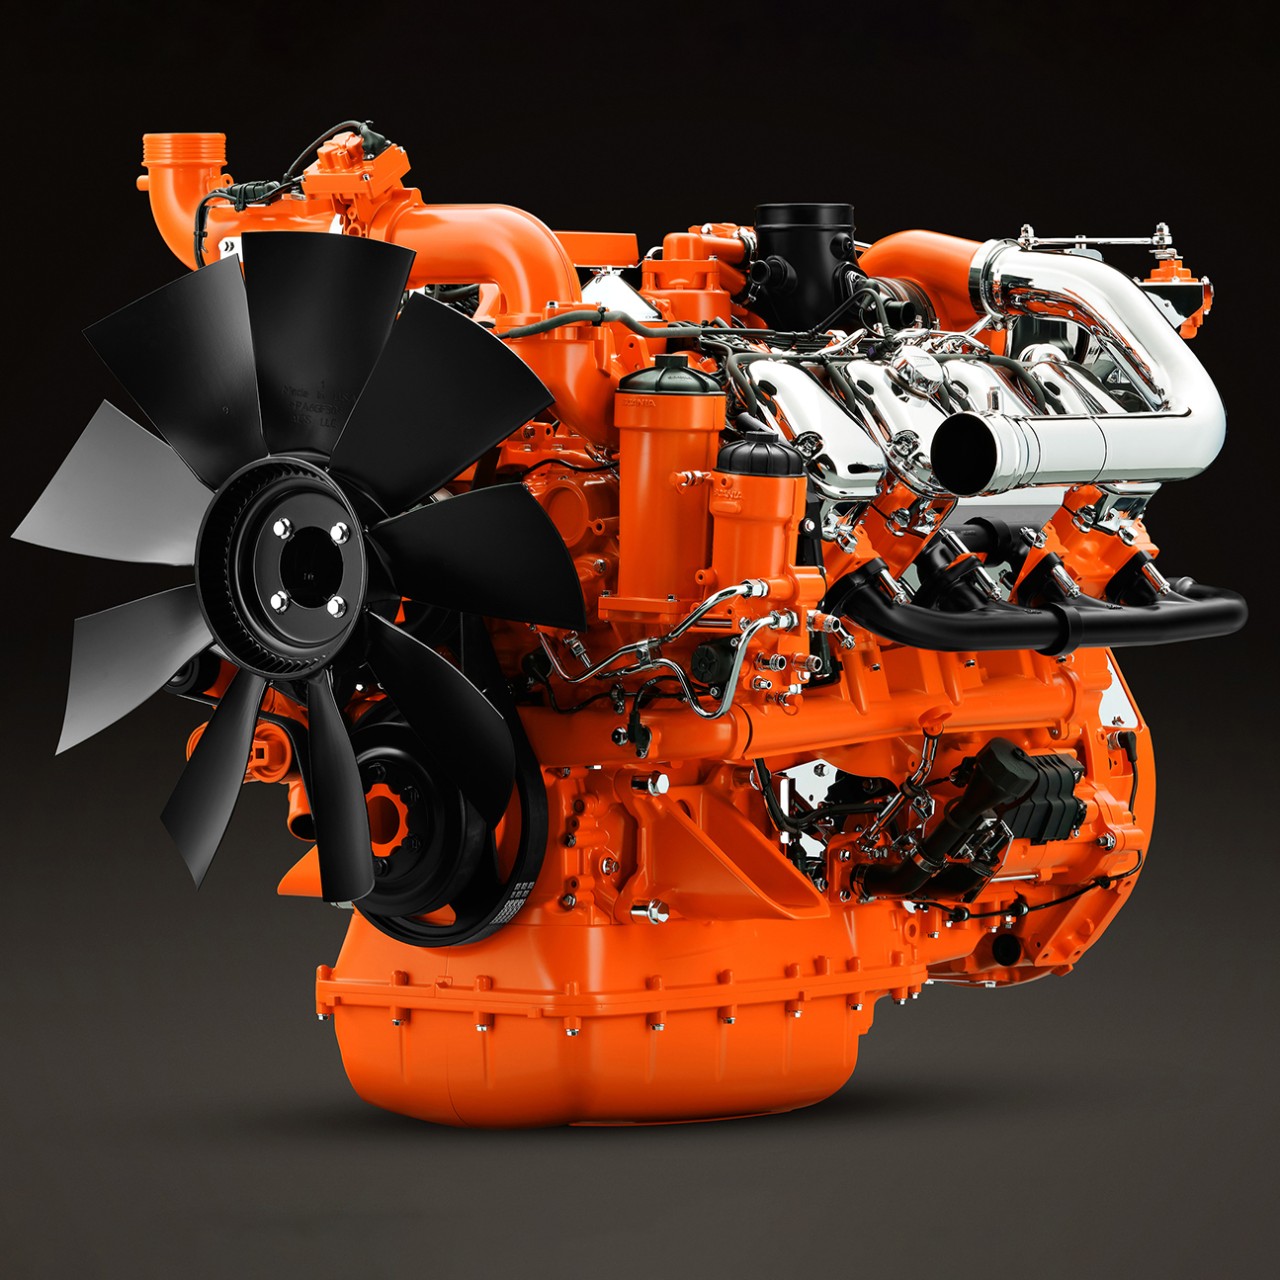  Scania 16-litre industrial power engine